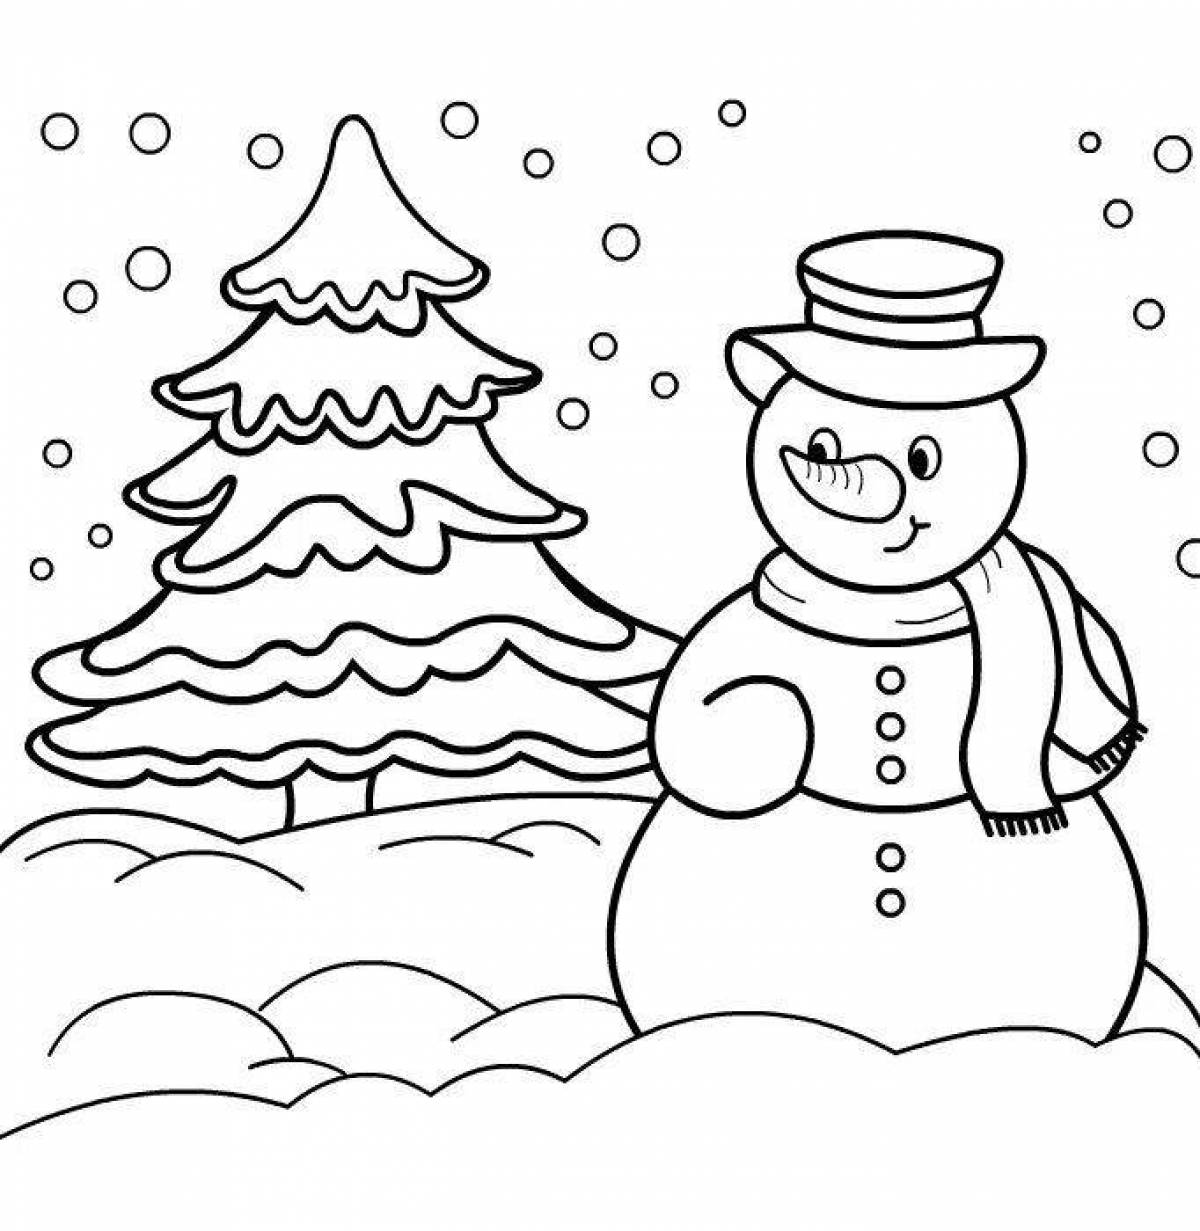 Holiday tree and snowman coloring book